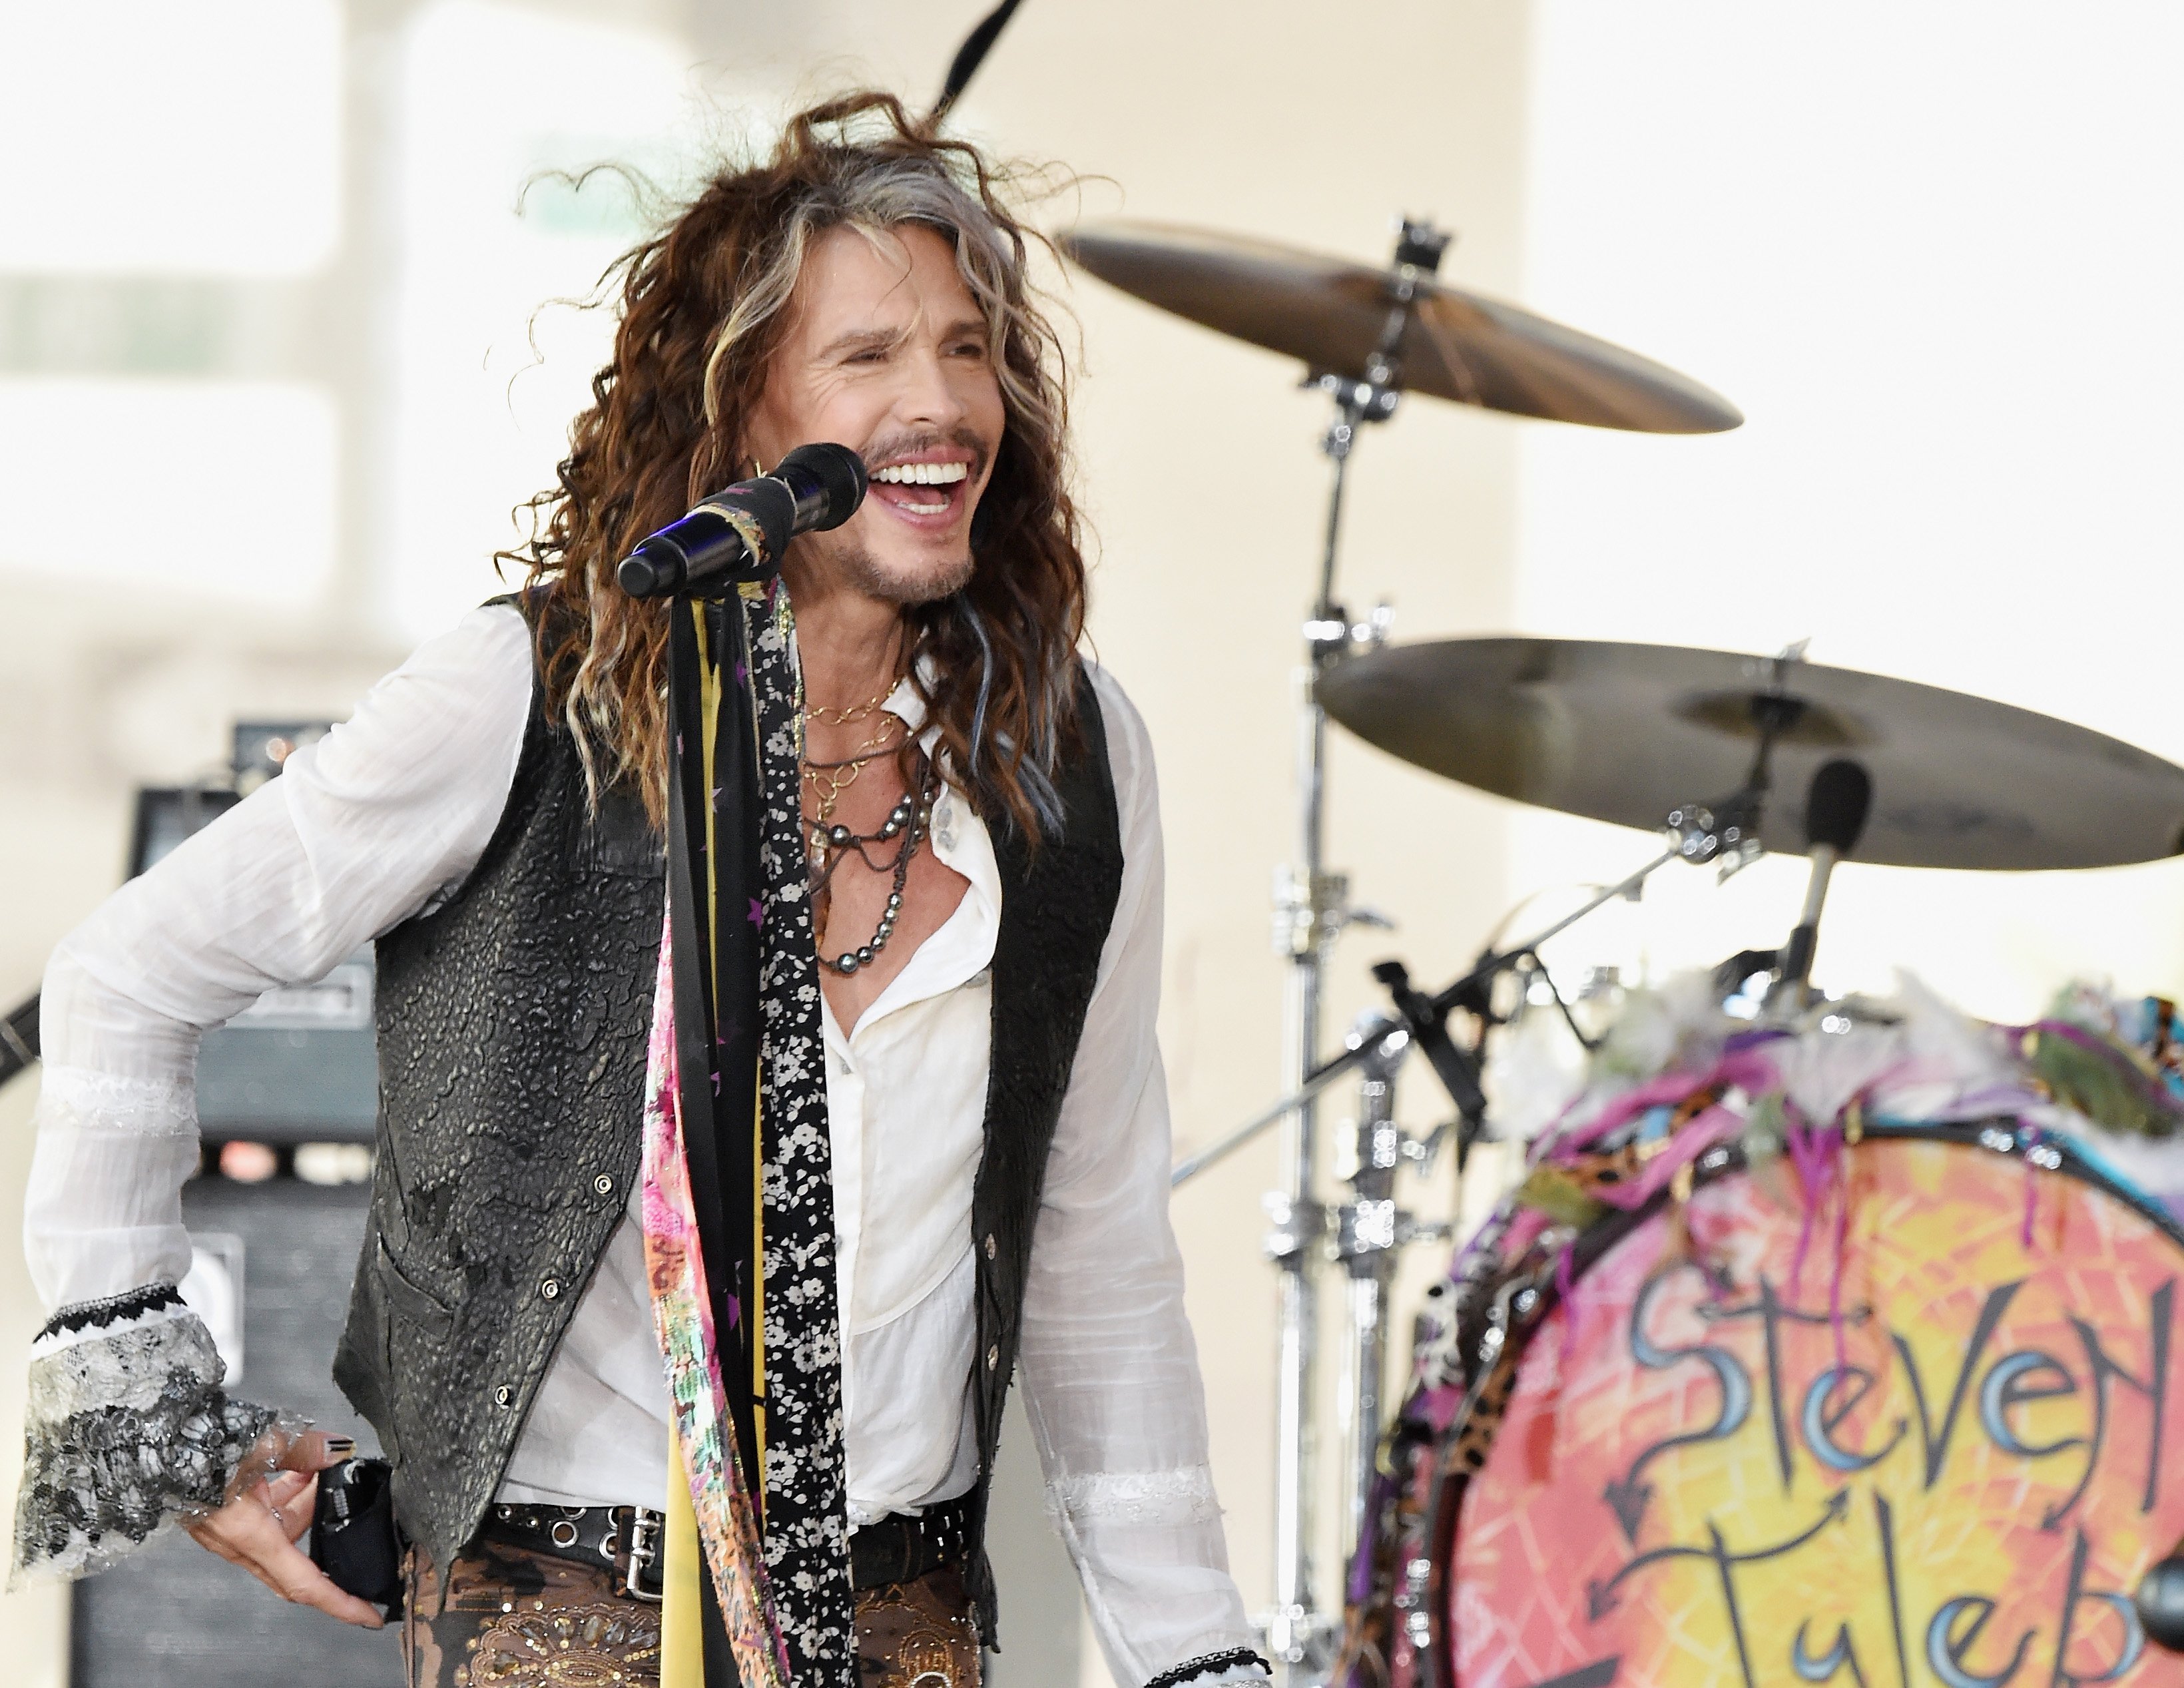 Aerosmith’s Steven Tyler Said He Became John Lennon While Recording The Beatles’ ‘Come Together’